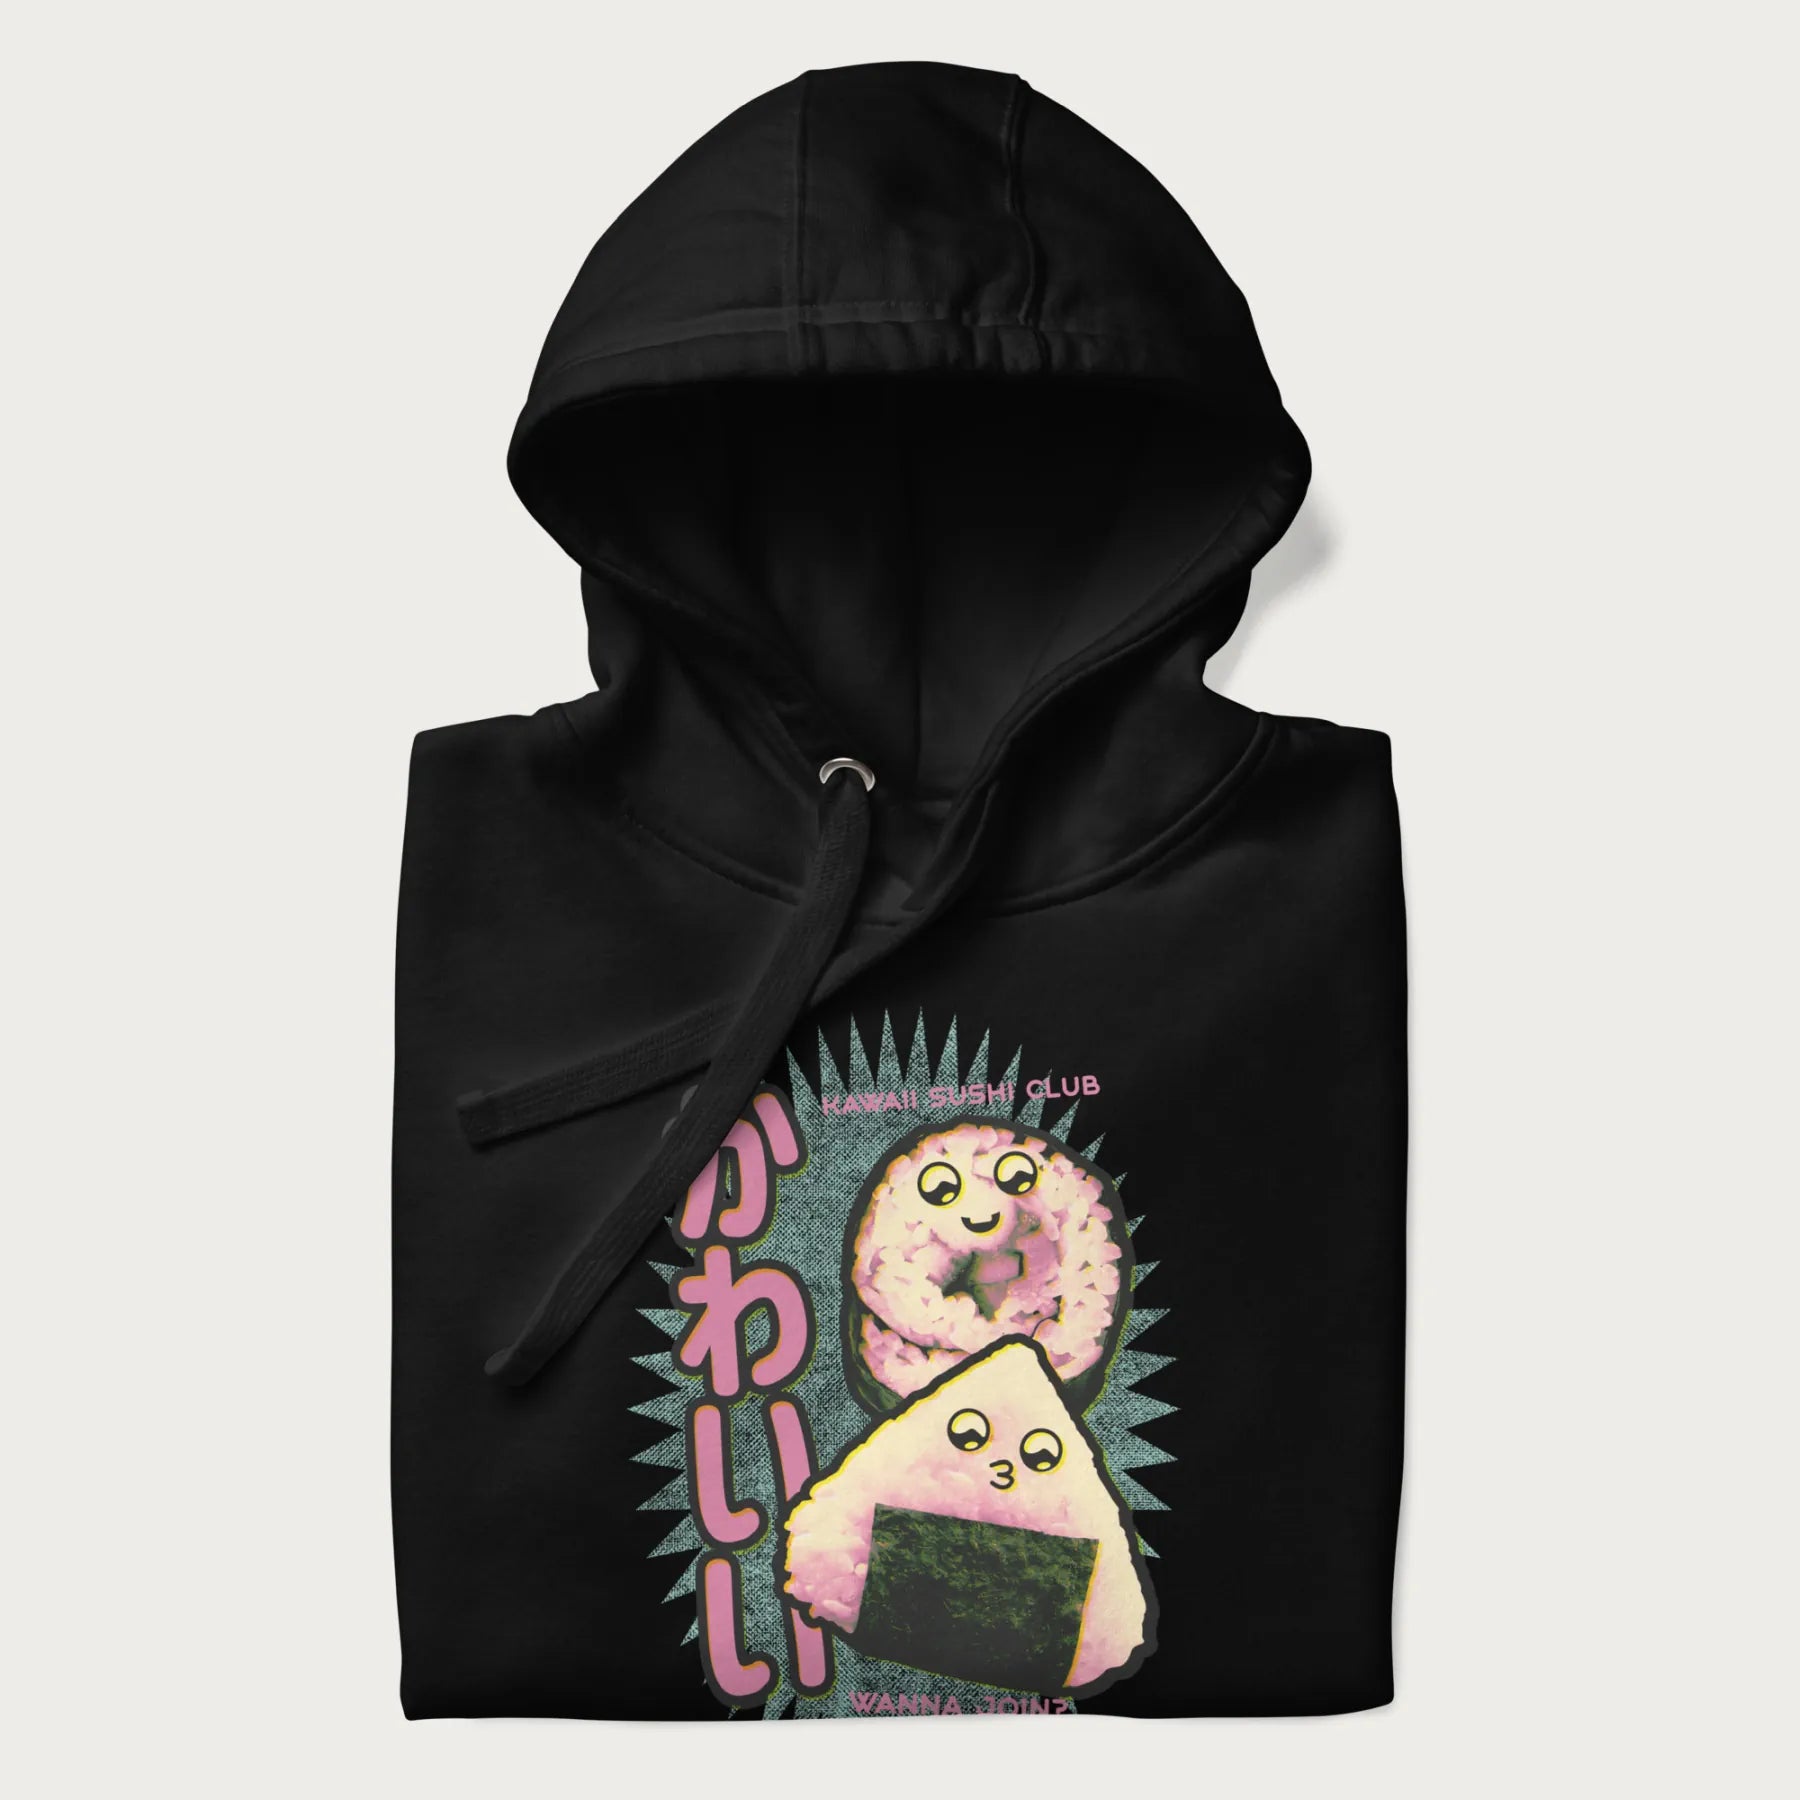 Folded black hoodie featuring a cute sushi and onigiri graphic with the text "Kawaii Sushi Club", colorful neon accents and Japanese characters.